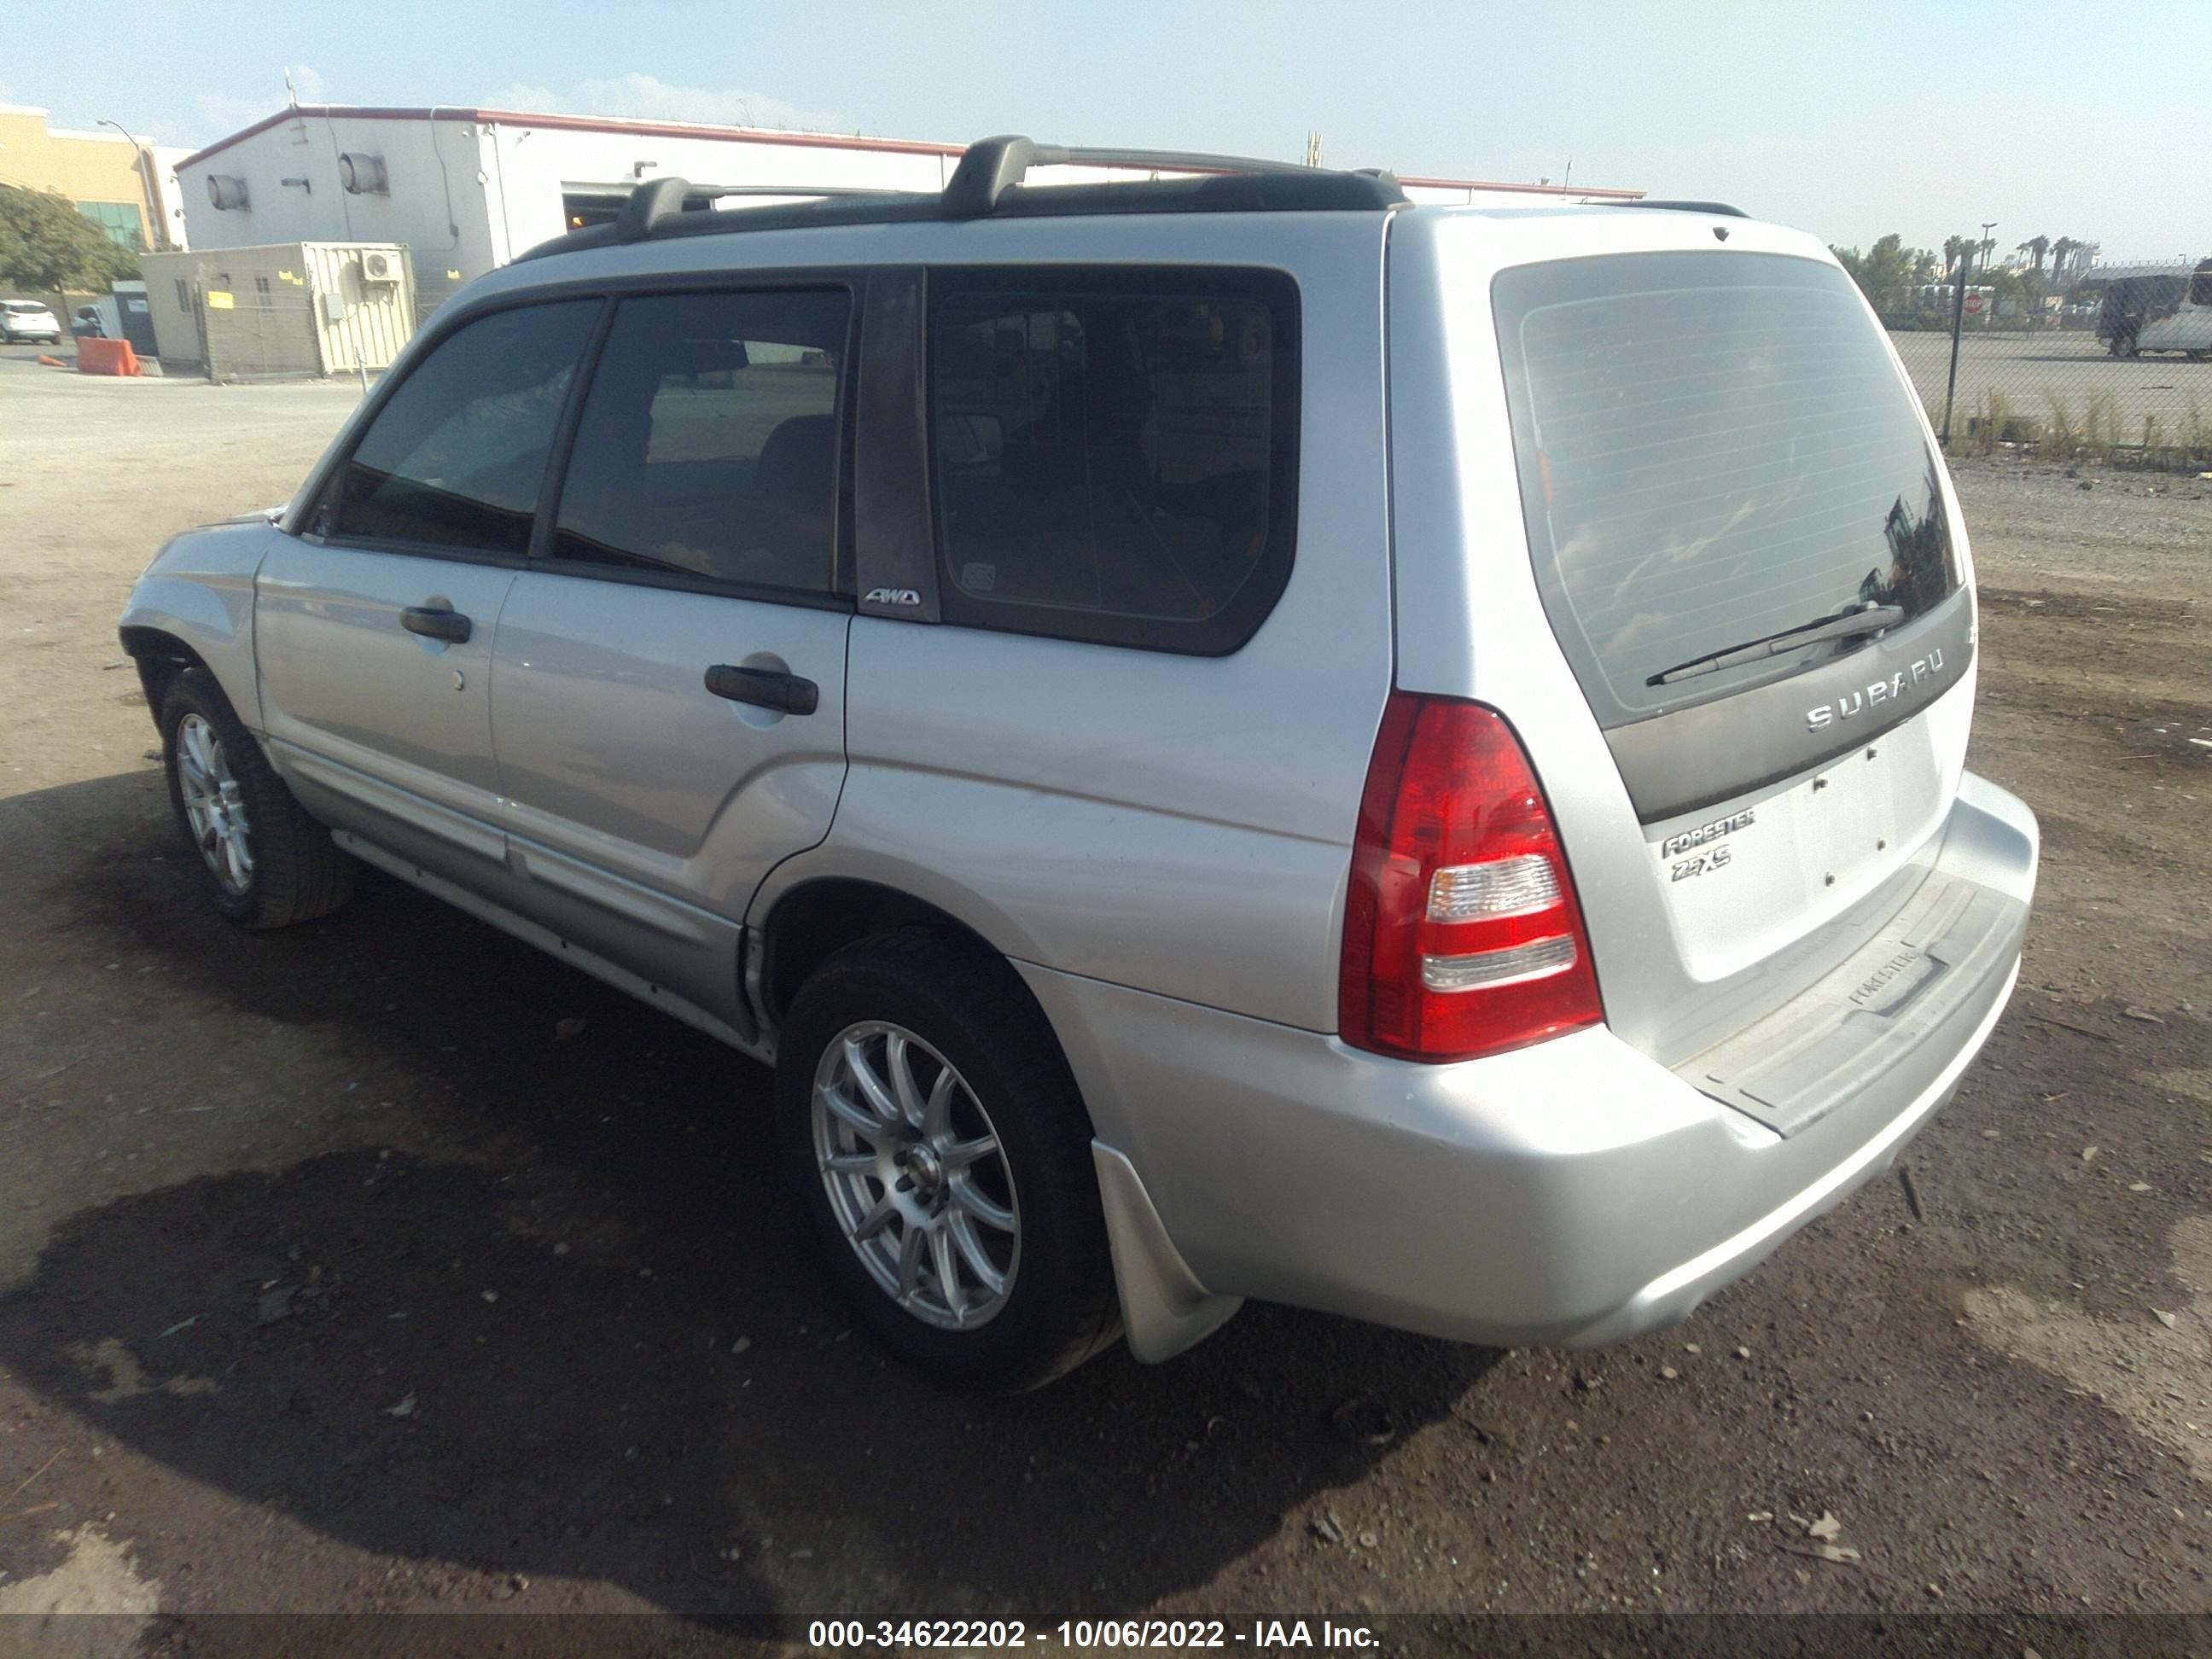 2004 SUBARU FORESTER XS VIN: JF1SG65614H737239